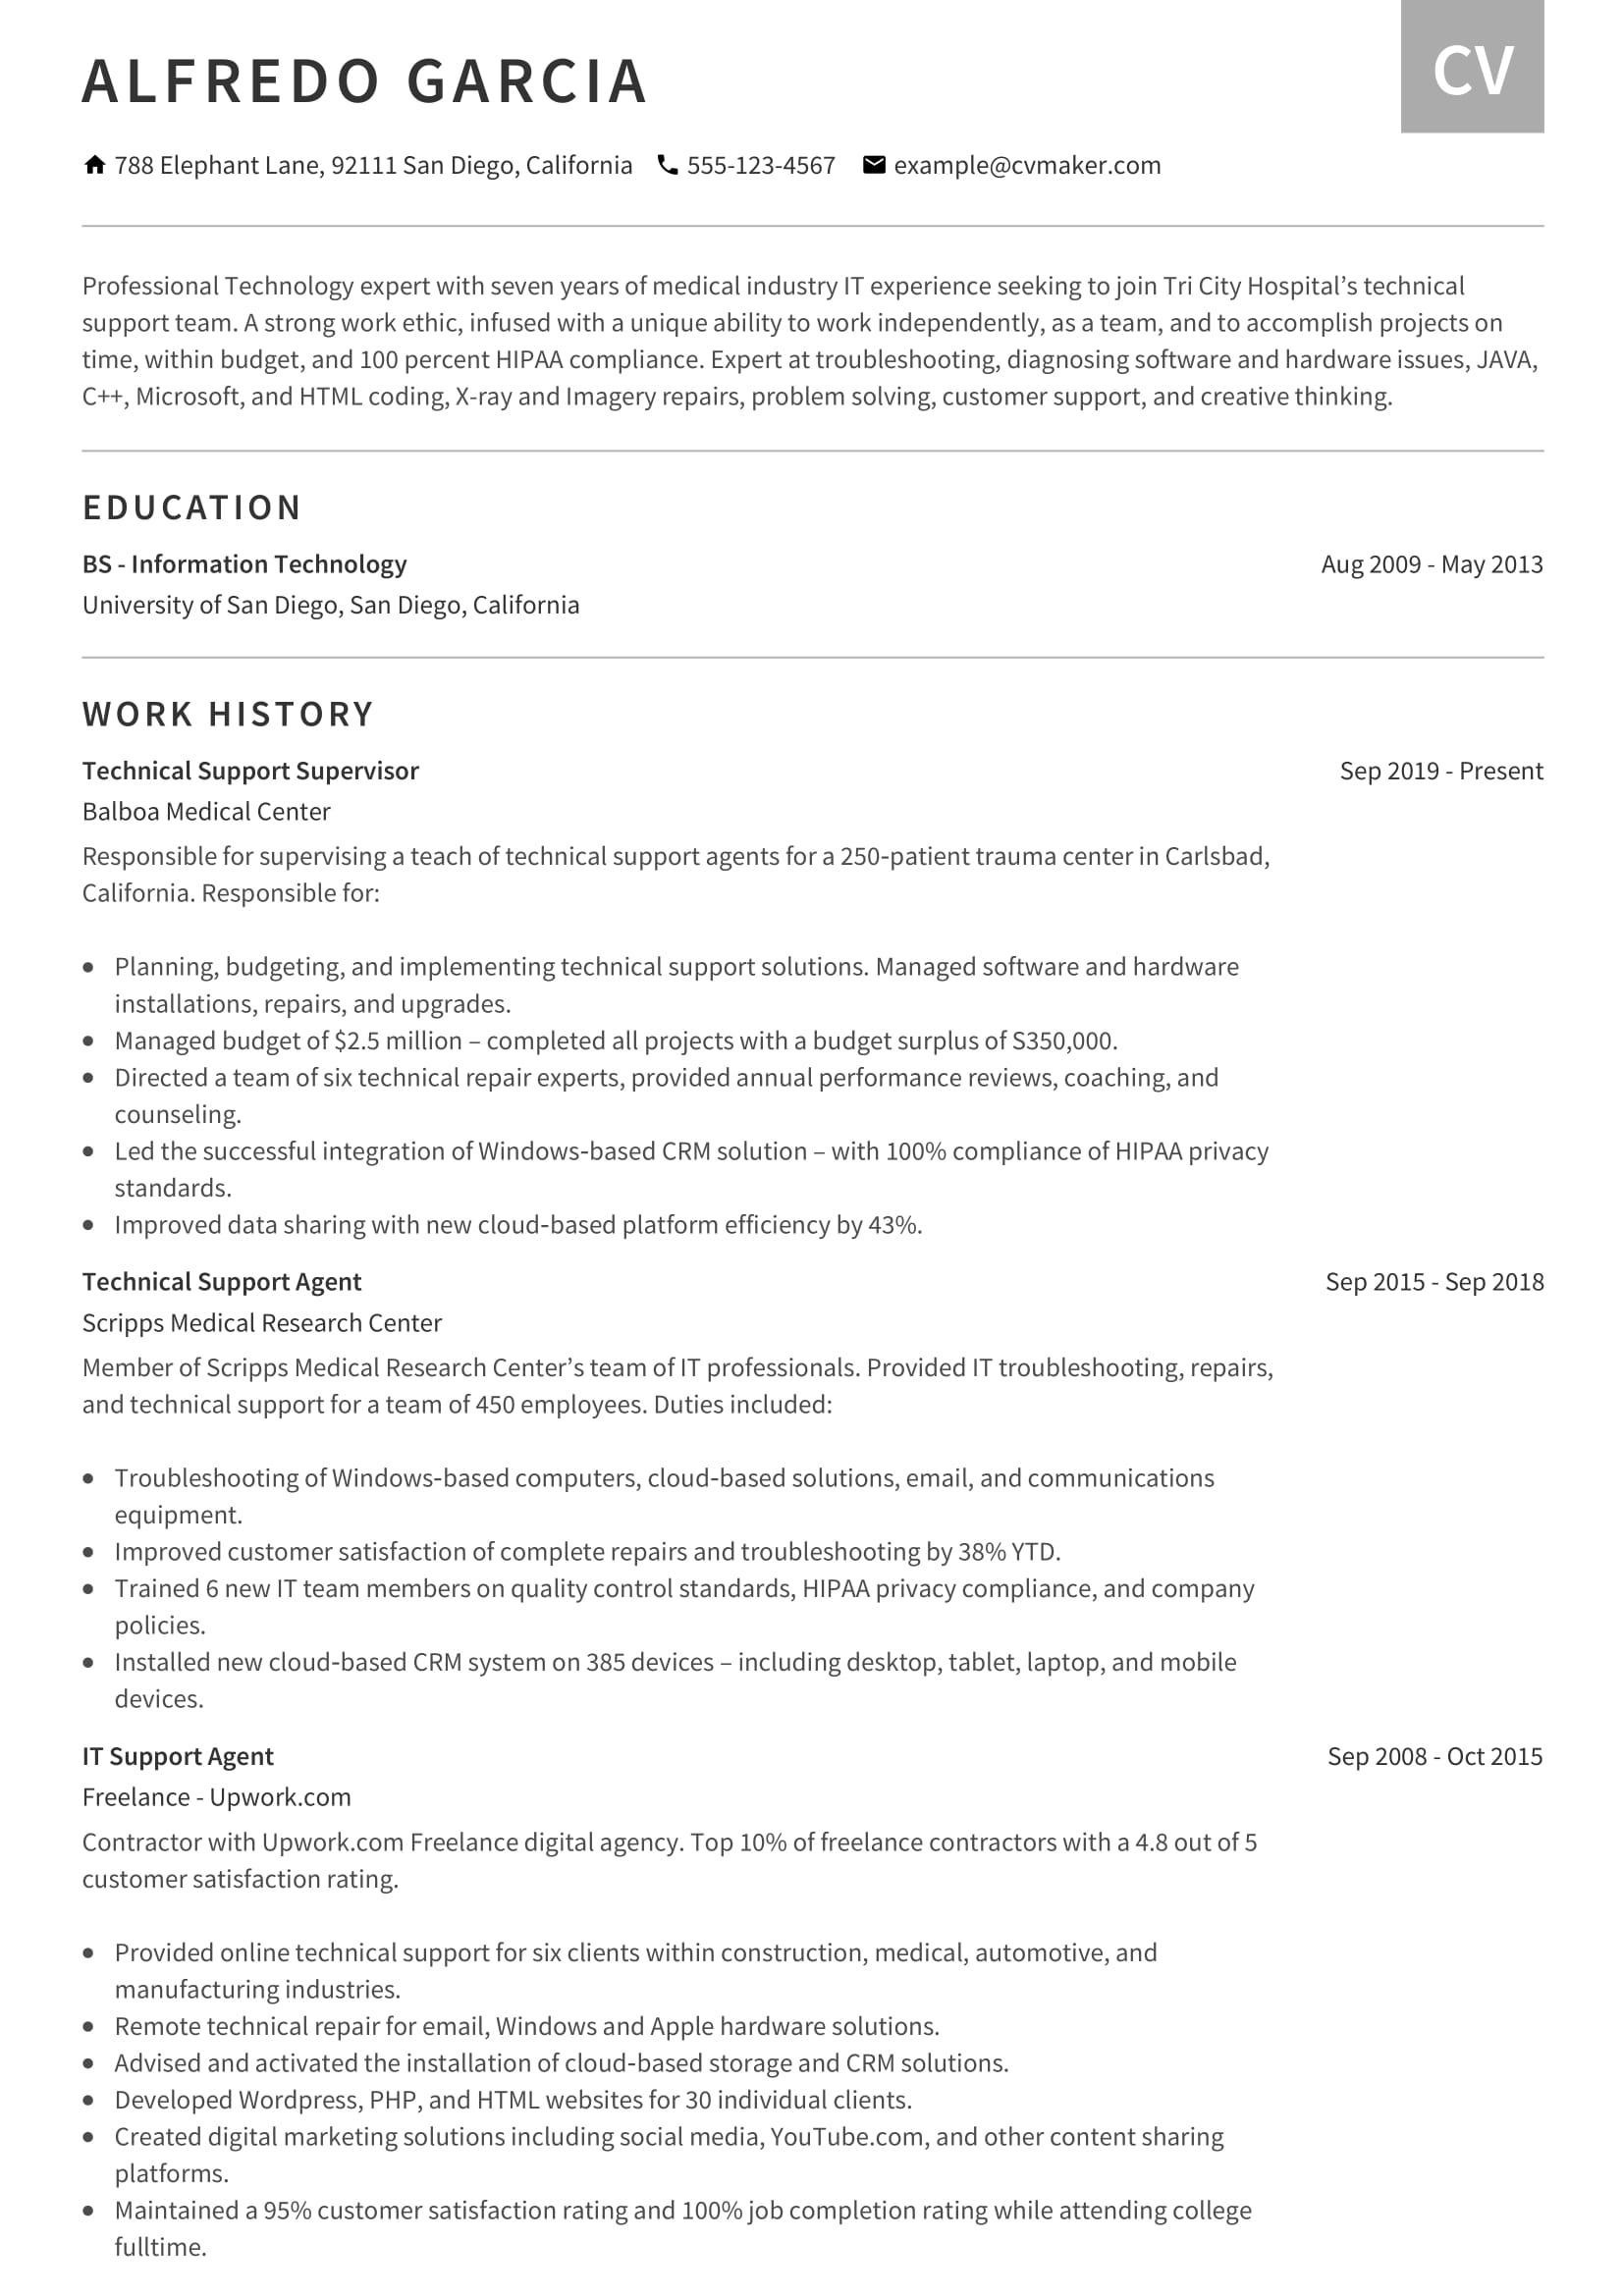 Medical Equipment Technical Support Specialist Resume Samples Technical Support Resume Example, Template & Writing Tips 2021 …